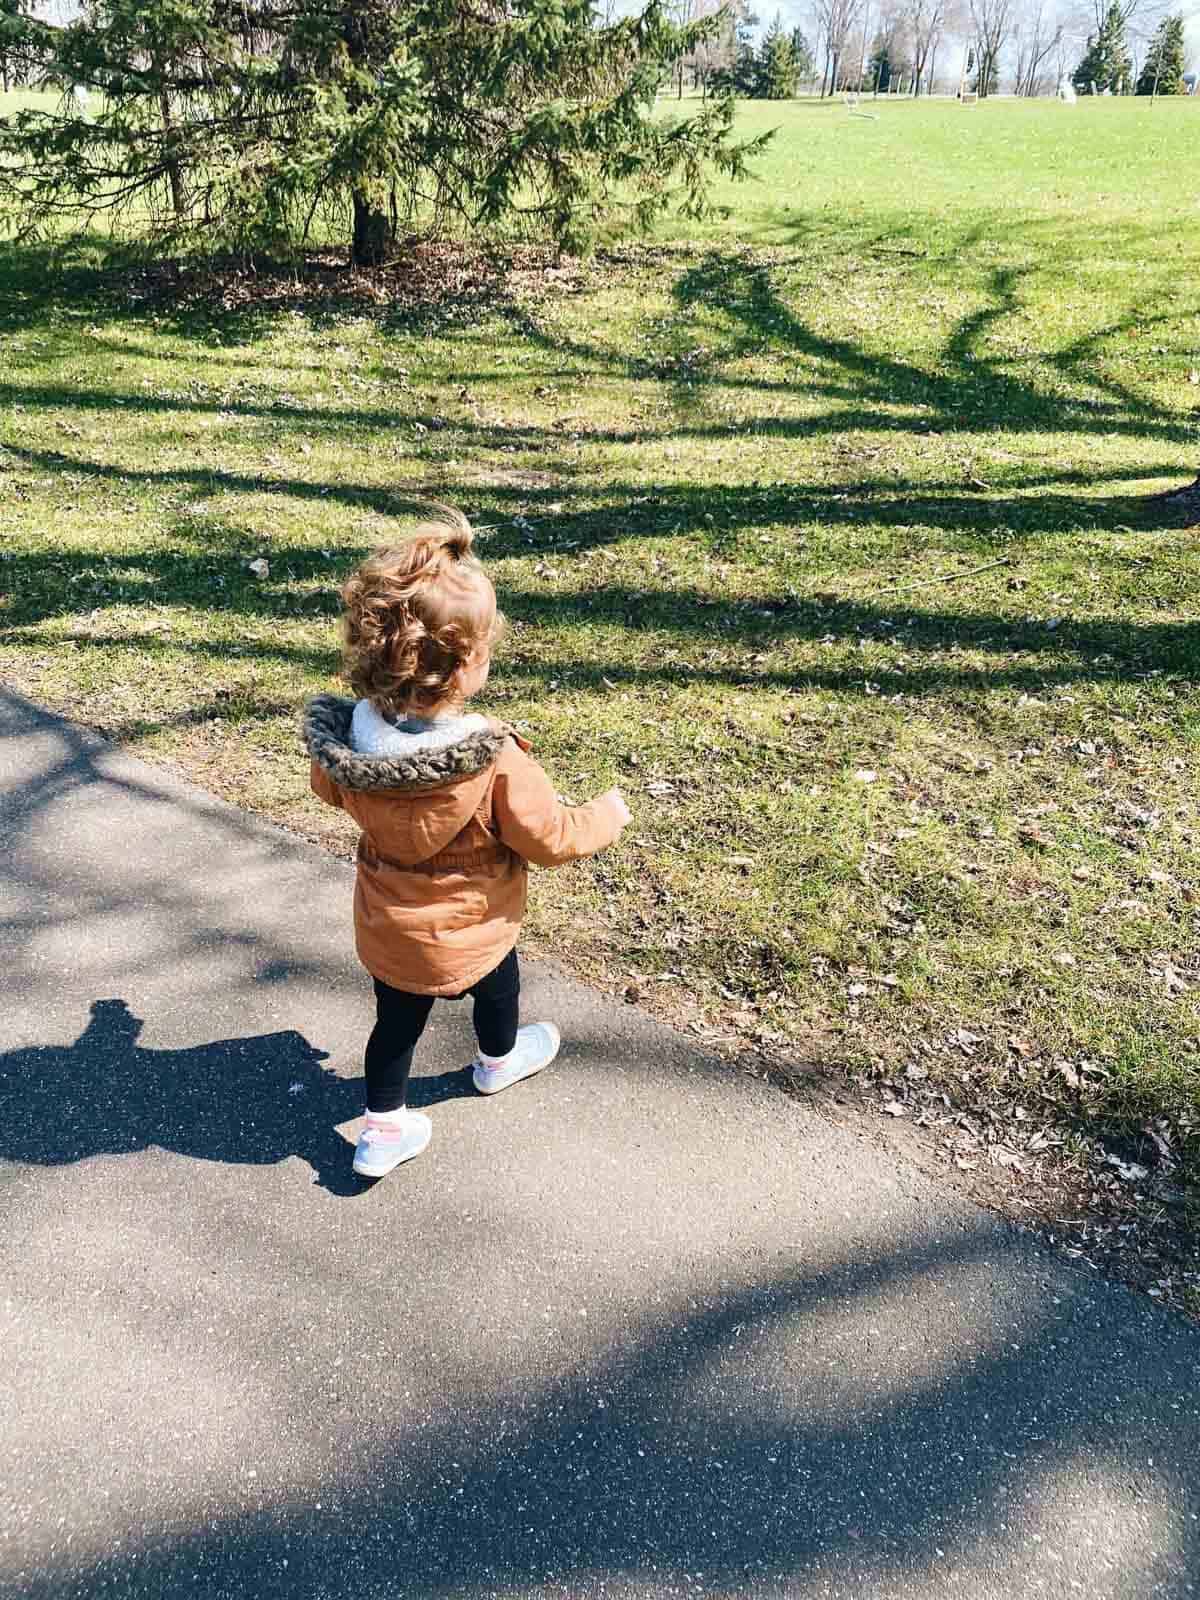 A child running towards some grass.